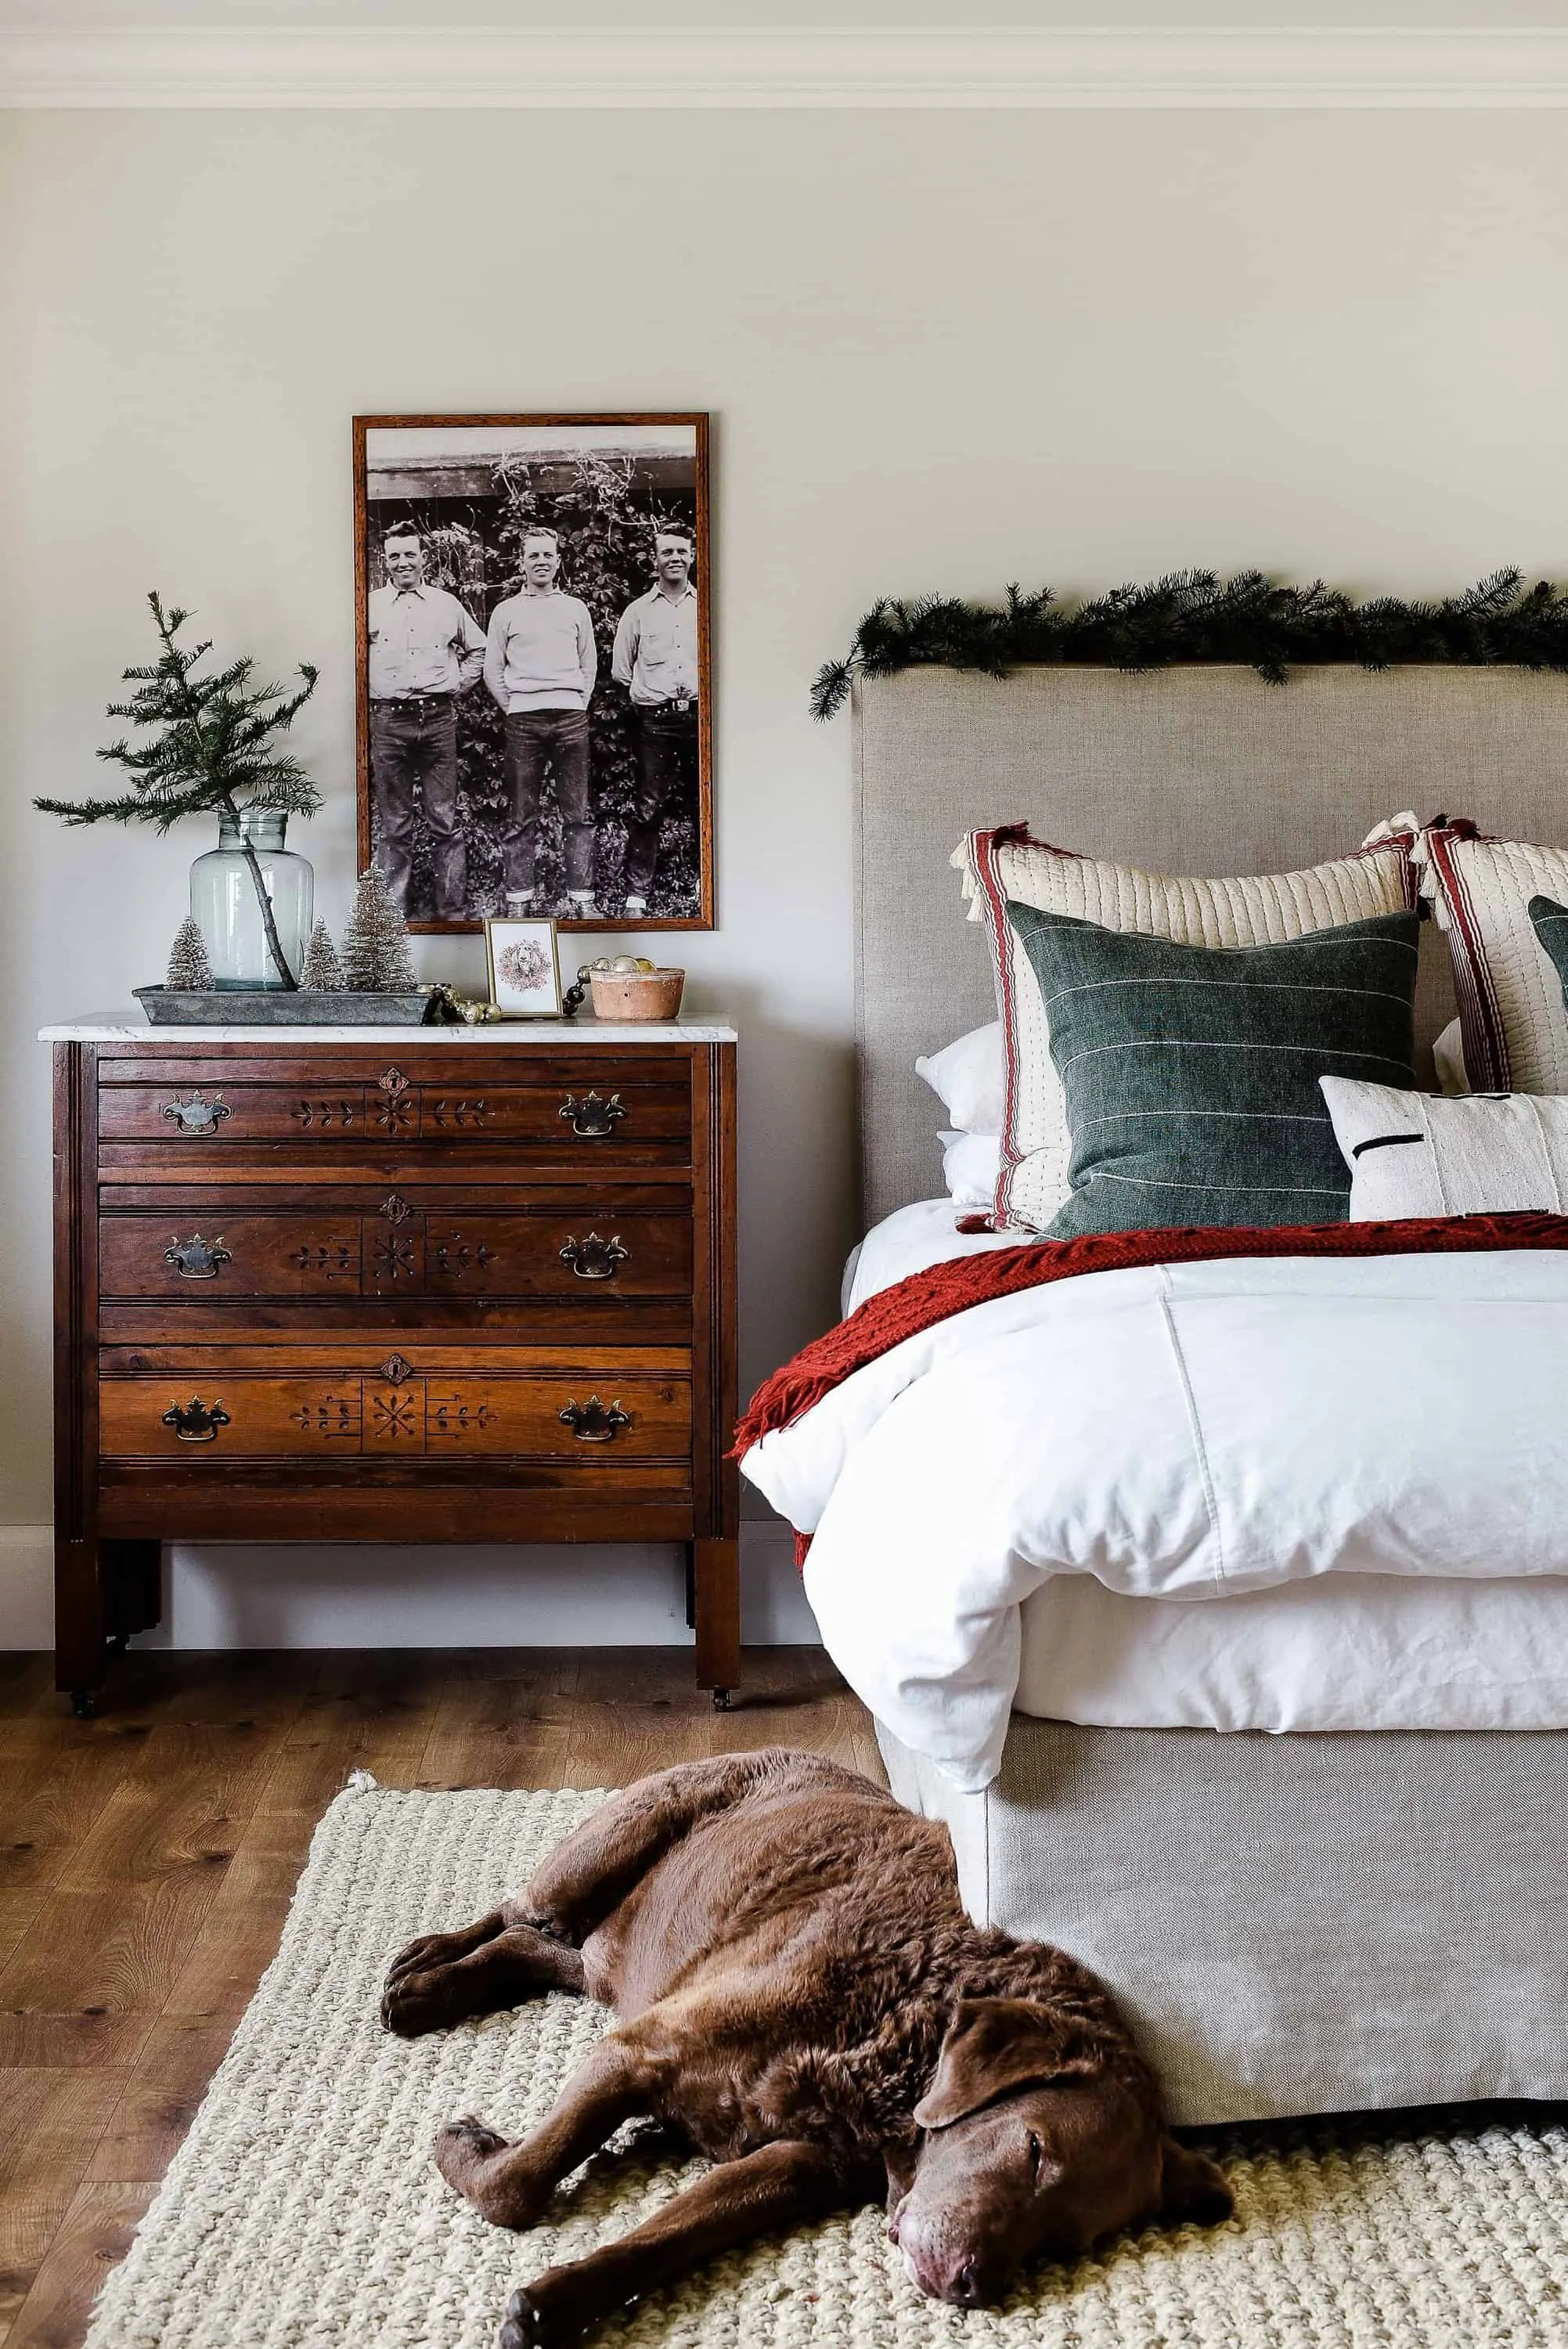 The stars of this Christmas bedroom are heirloom items found in our old farmhouse, I’ve repurposed them to fit with our modern aesthetic while keeping some of the old world charm. Come on in!